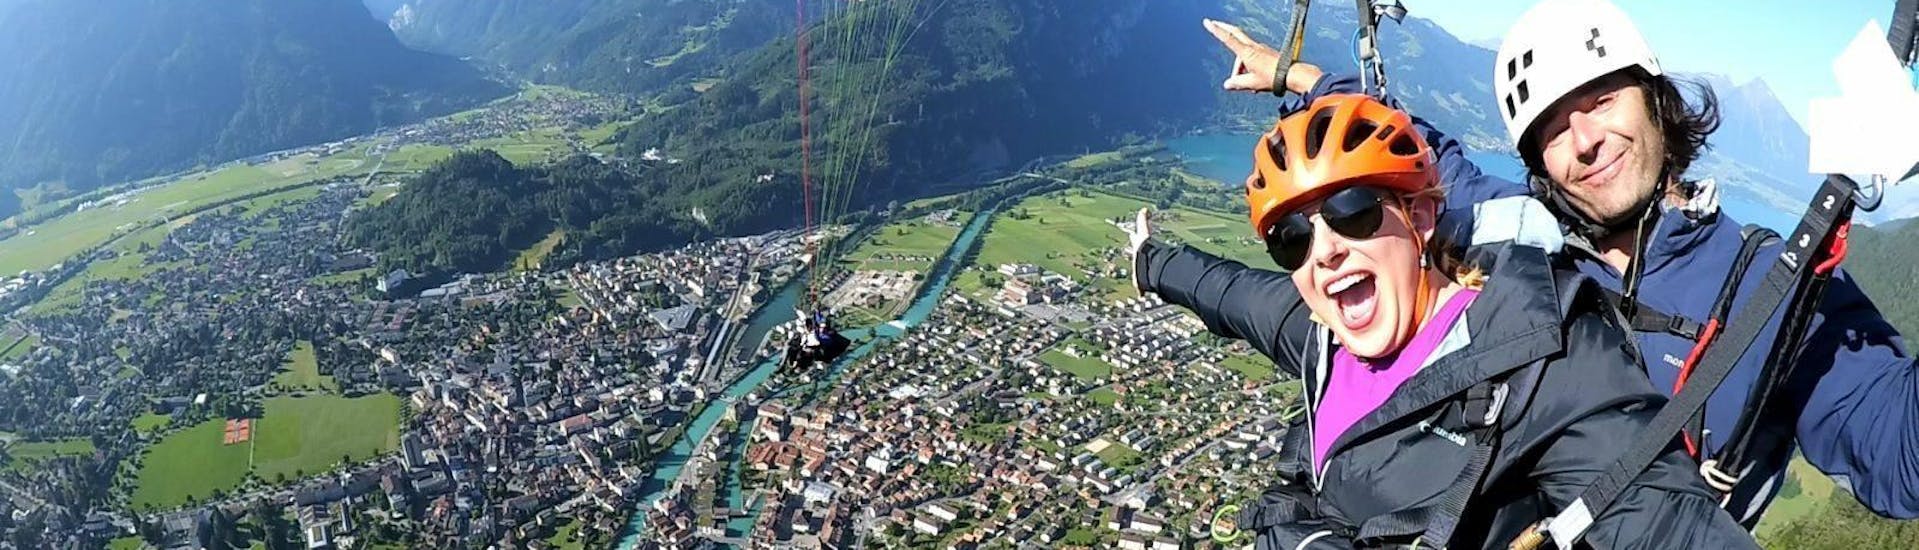 On a paragliding flight in Interlaken with Twin Paragliding, a certified tandem pilot and his passenger are taking a picture while gliding over the beautiful town of Interlaken.